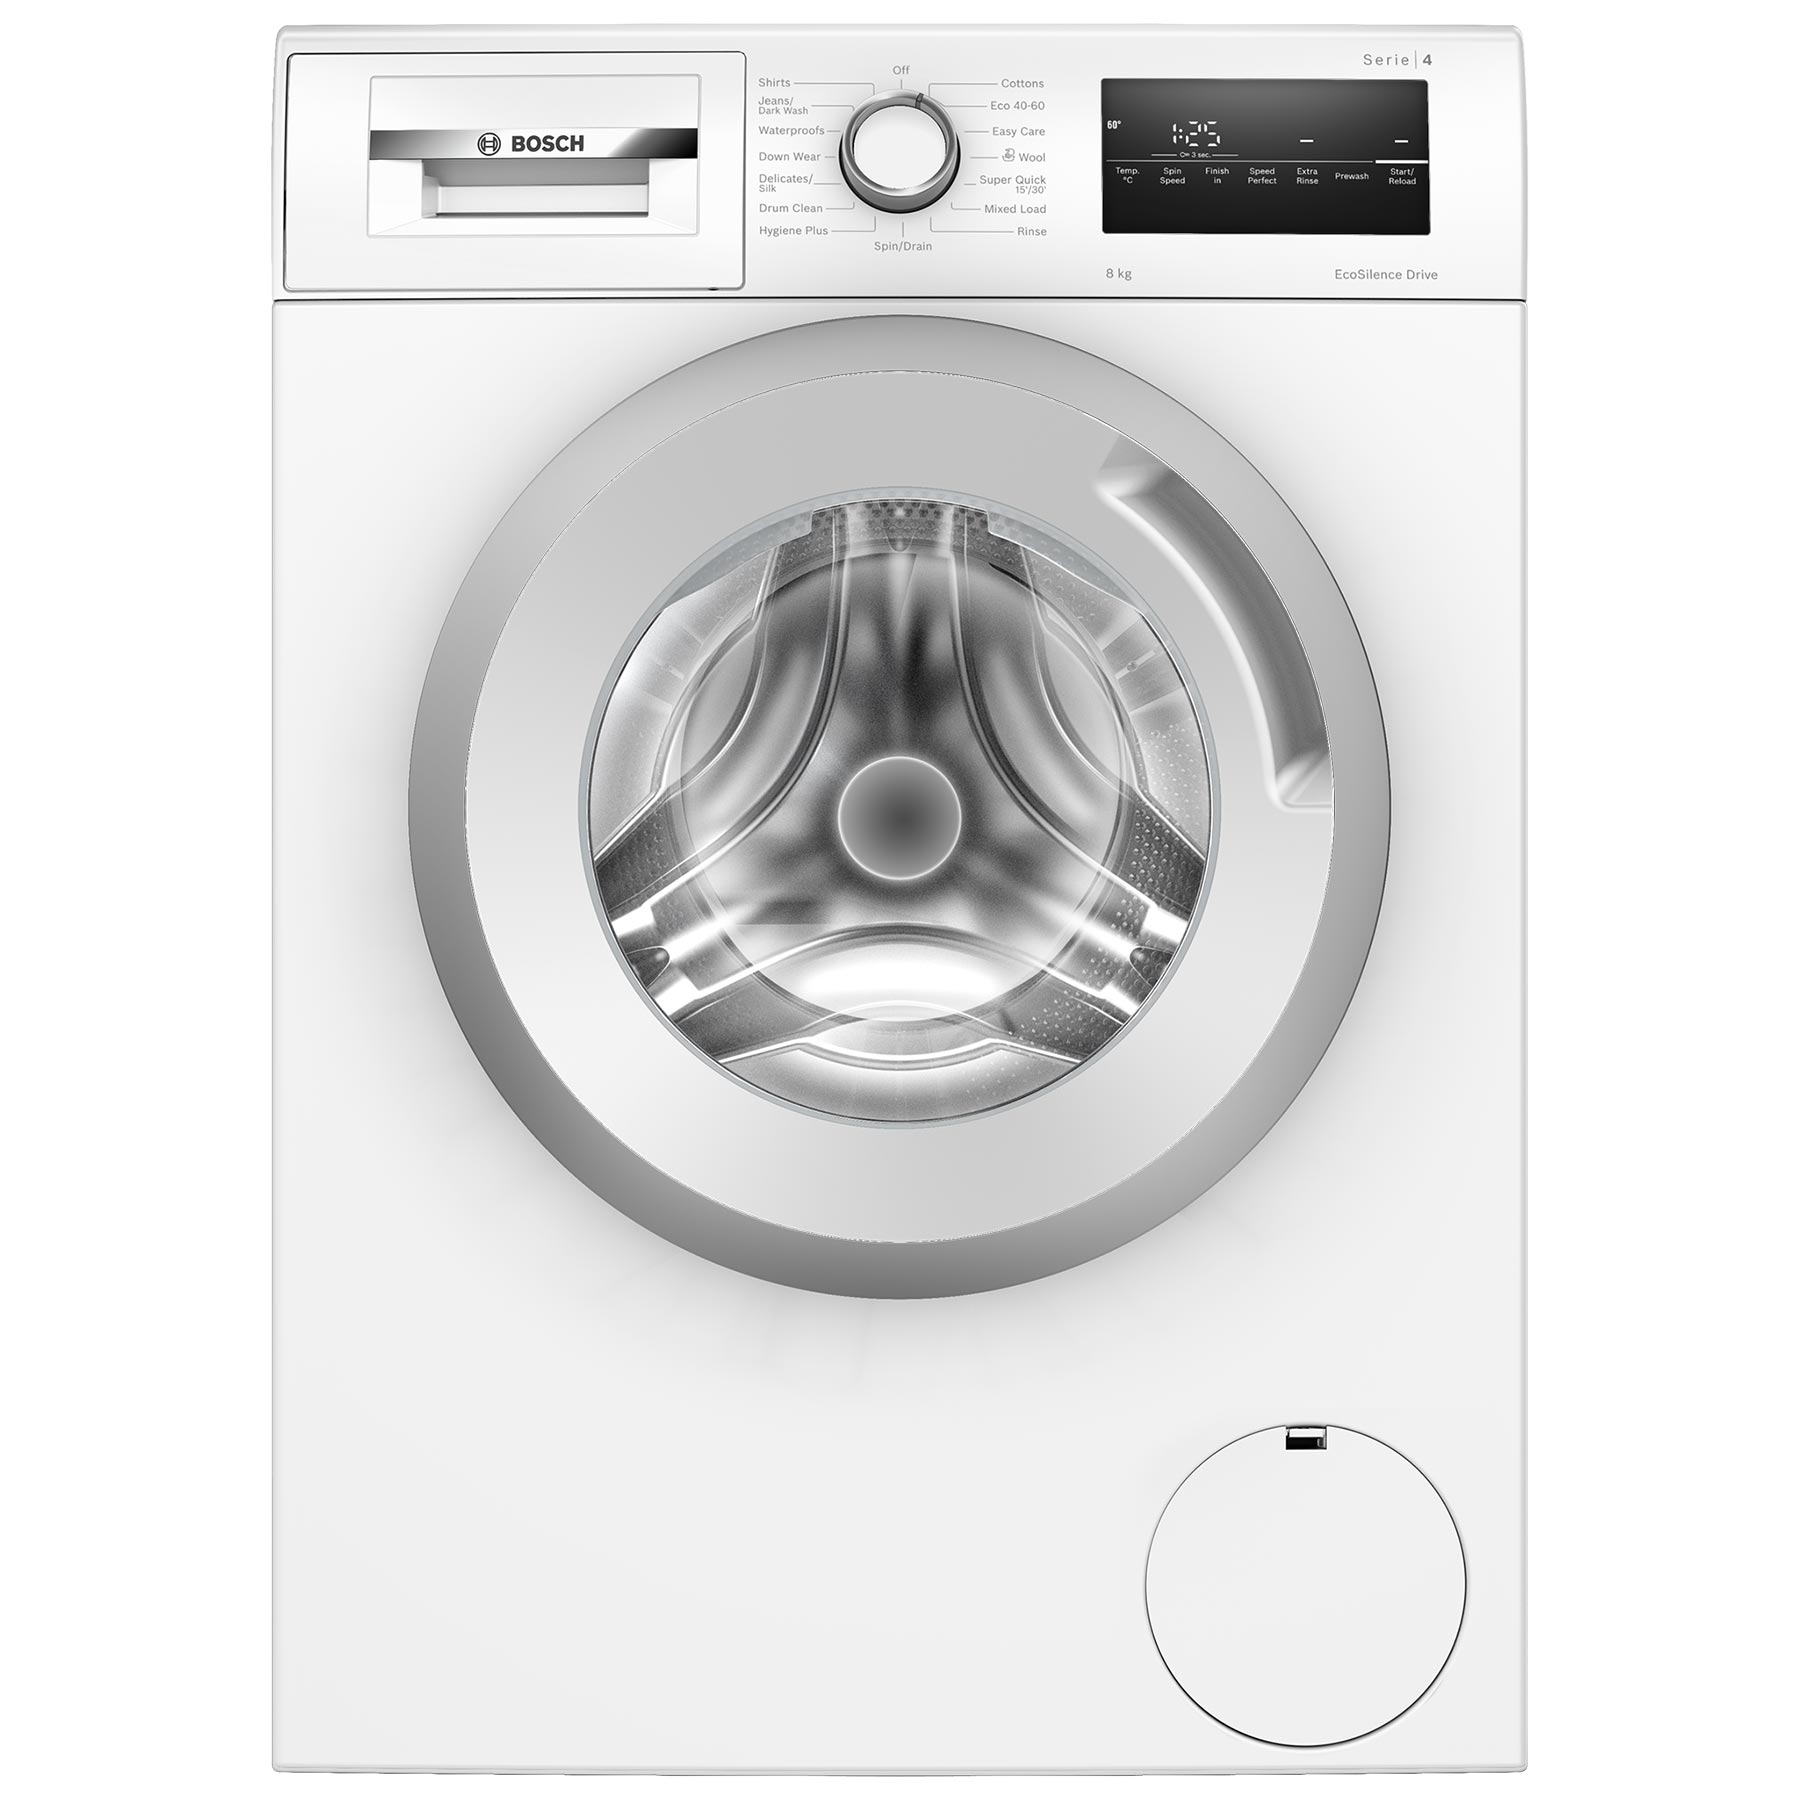 Image of Bosch WAN28282GB Series 4 Washing Machine in White 1400rpm 8Kg C Rated